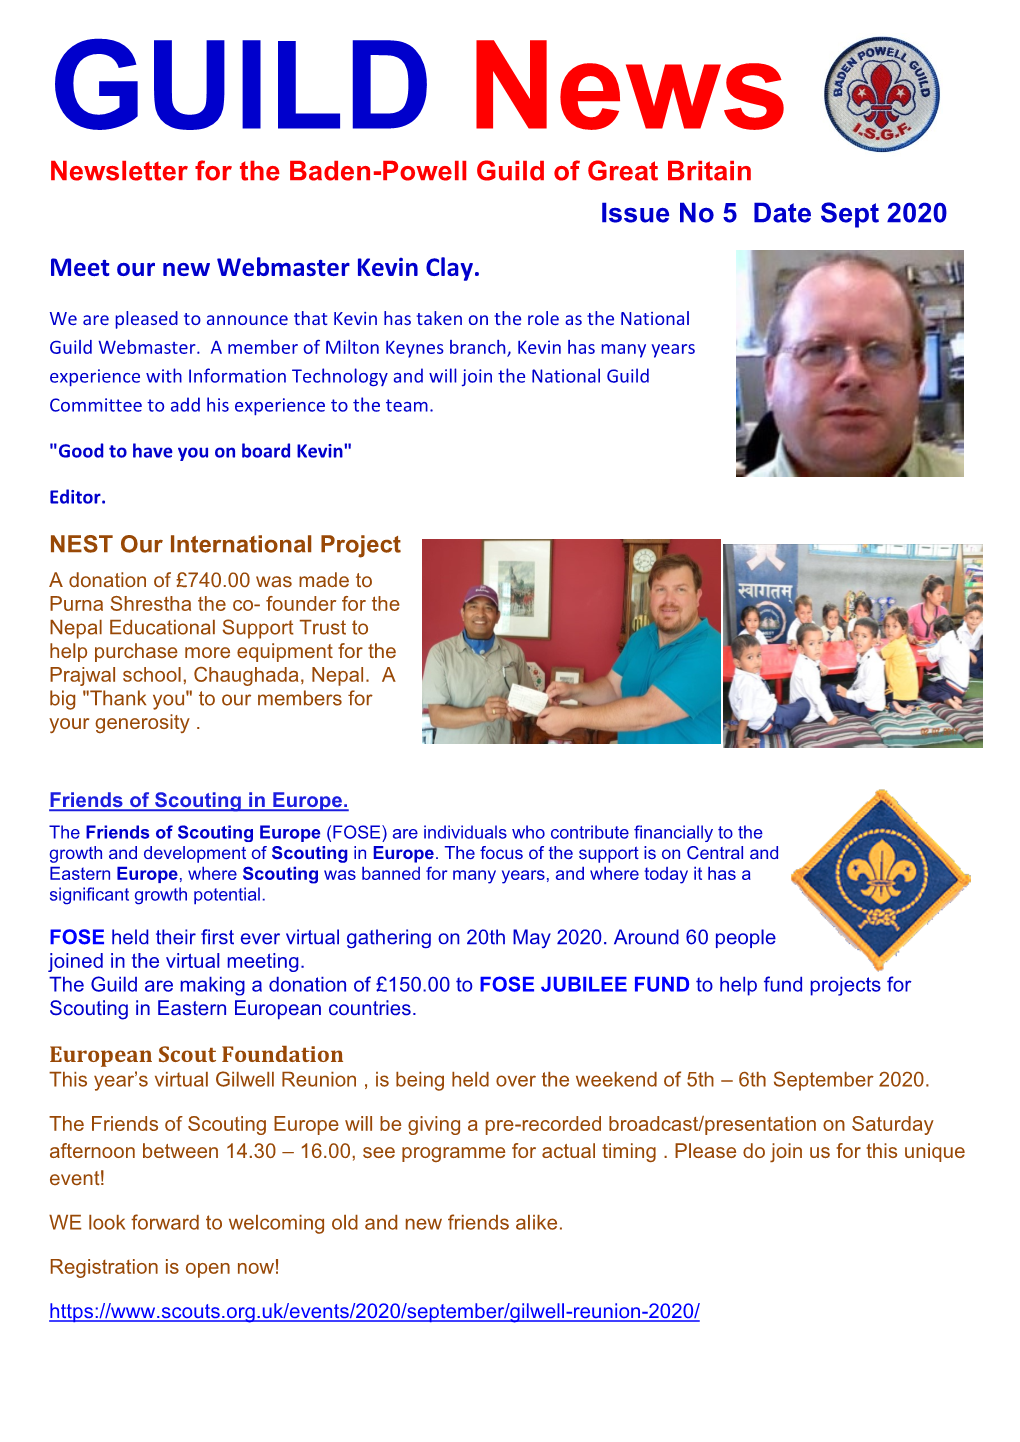 Newsletter for the Baden-Powell Guild of Great Britain Issue No 5 Date Sept 2020